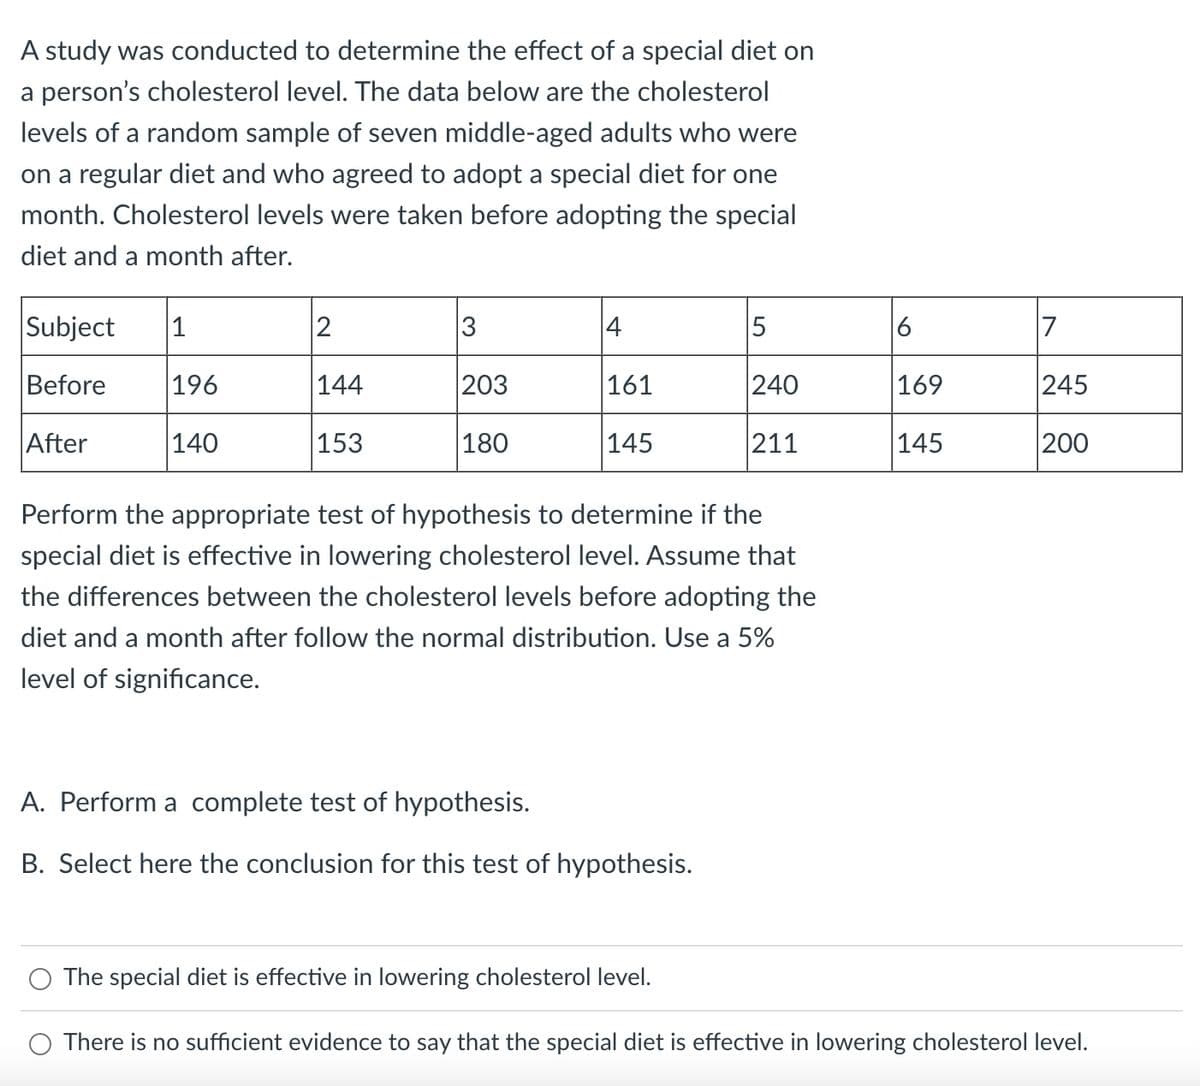 A study was conducted to determine the effect of a special diet on
a person's cholesterol level. The data below are the cholesterol
levels of a random sample of seven middle-aged adults who were
on a regular diet and who agreed to adopt a special diet for one
month. Cholesterol levels were taken before adopting the special
diet and a month after.
Subject
1
2
3
4
5
7
Before
196
144
203
161
240
245
After
140
153
180
145
211
200
Perform the appropriate test of hypothesis to determine if the
special diet is effective in lowering cholesterol level. Assume that
the differences between the cholesterol levels before adopting the
diet and a month after follow the normal distribution. Use a 5%
level of significance.
A. Perform a complete test of hypothesis.
B. Select here the conclusion for this test of hypothesis.
The special diet is effective in lowering cholesterol level.
There is no sufficient evidence to say that the special diet is effective in lowering cholesterol level.
6
169
145